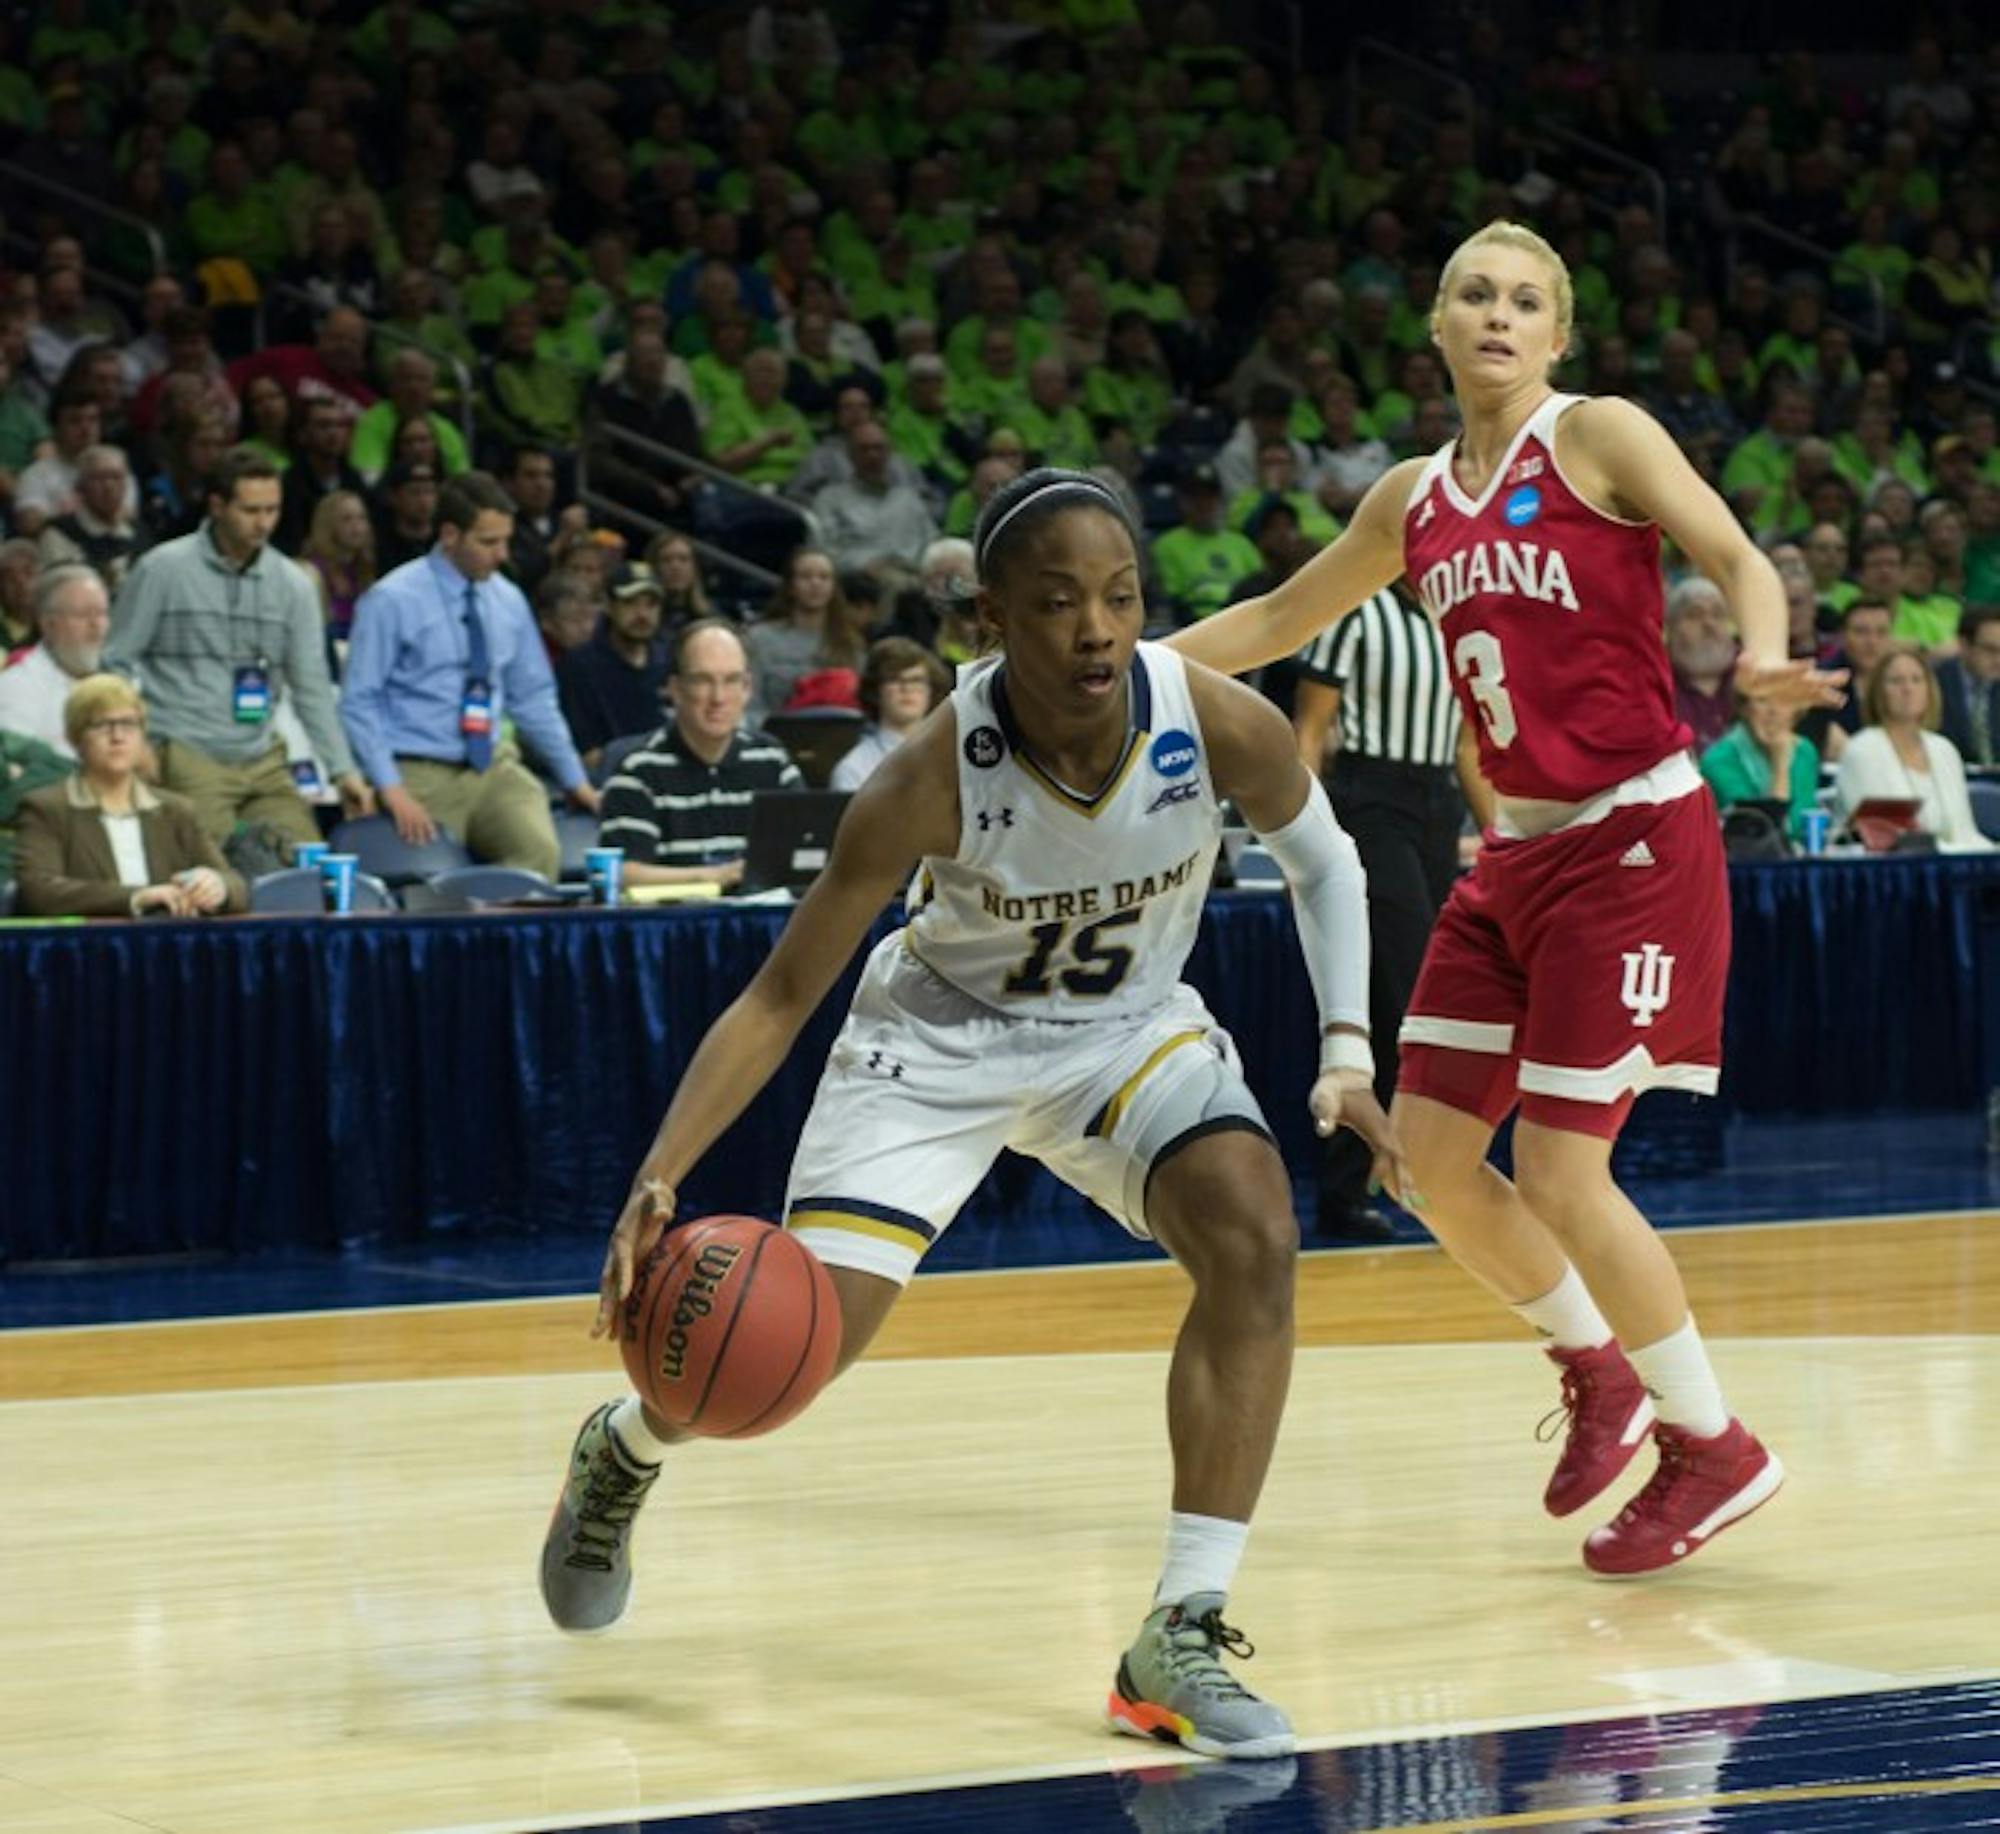 Irish junior guard Lindsay Allen drives to the paint during Notre Dame’s 87-70 win over Indiana at Purcell Pavilion on Monday. Allen scored a season-high 22 points to lead her team to the Sweet 16.